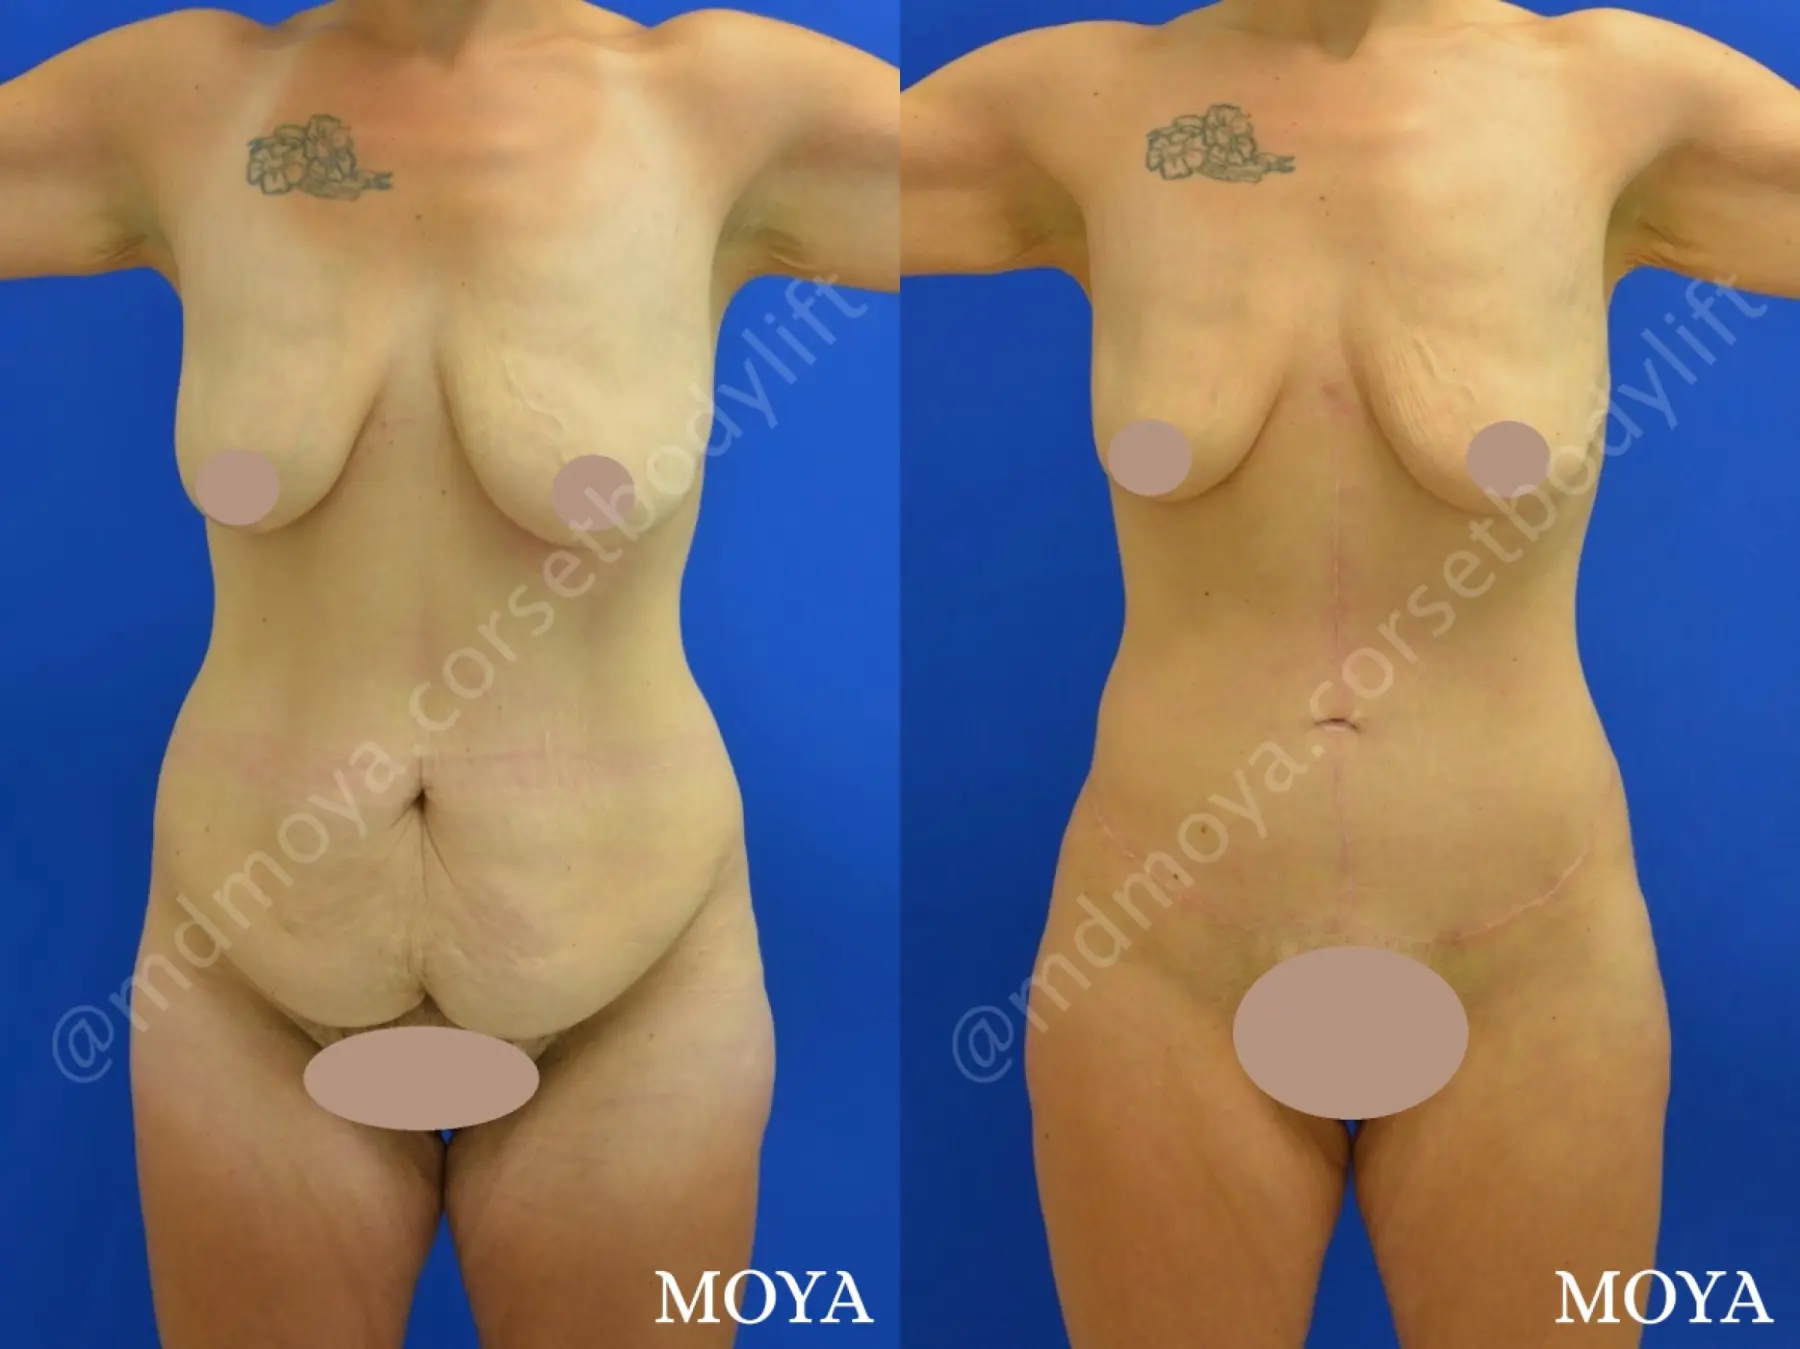 Fleur-de-lis Tummy Tuck (std):  BMI 24 - Before and After 1